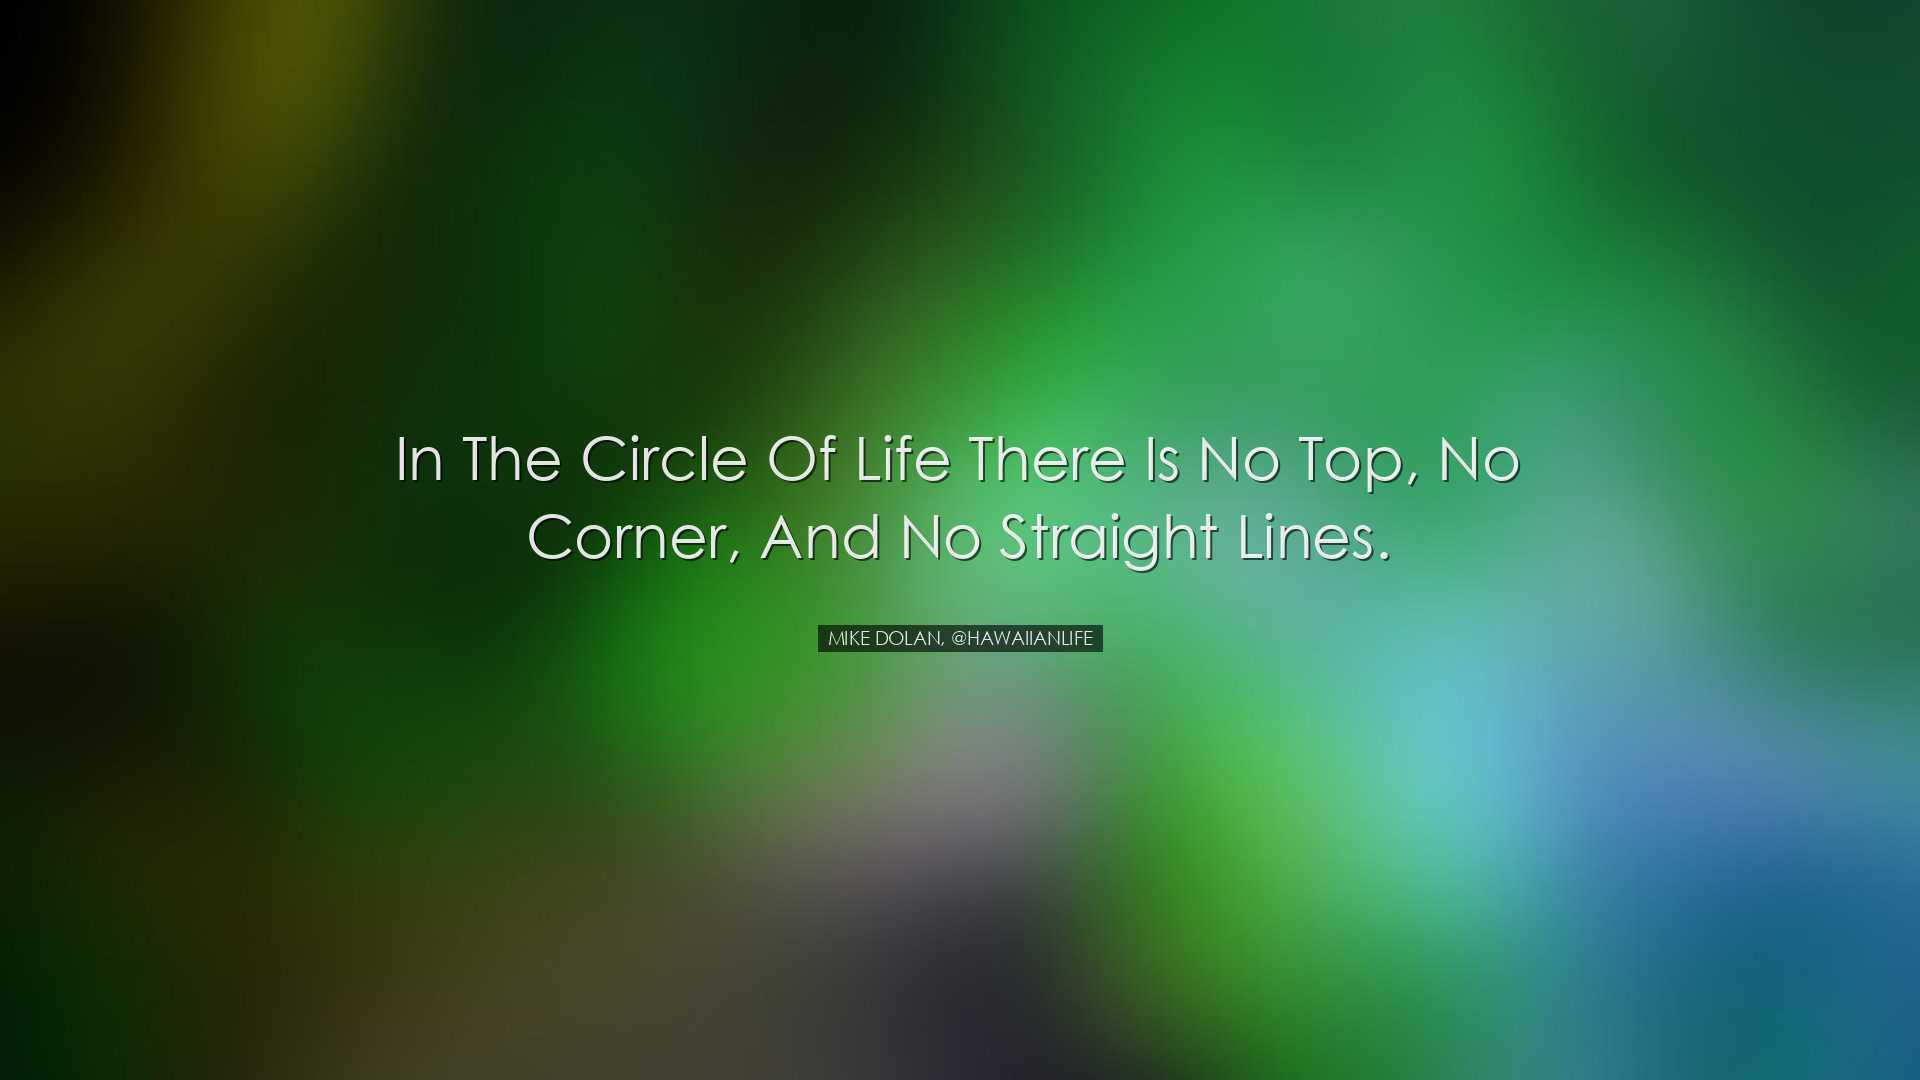 In the circle of life there is no top, no corner, and no straight